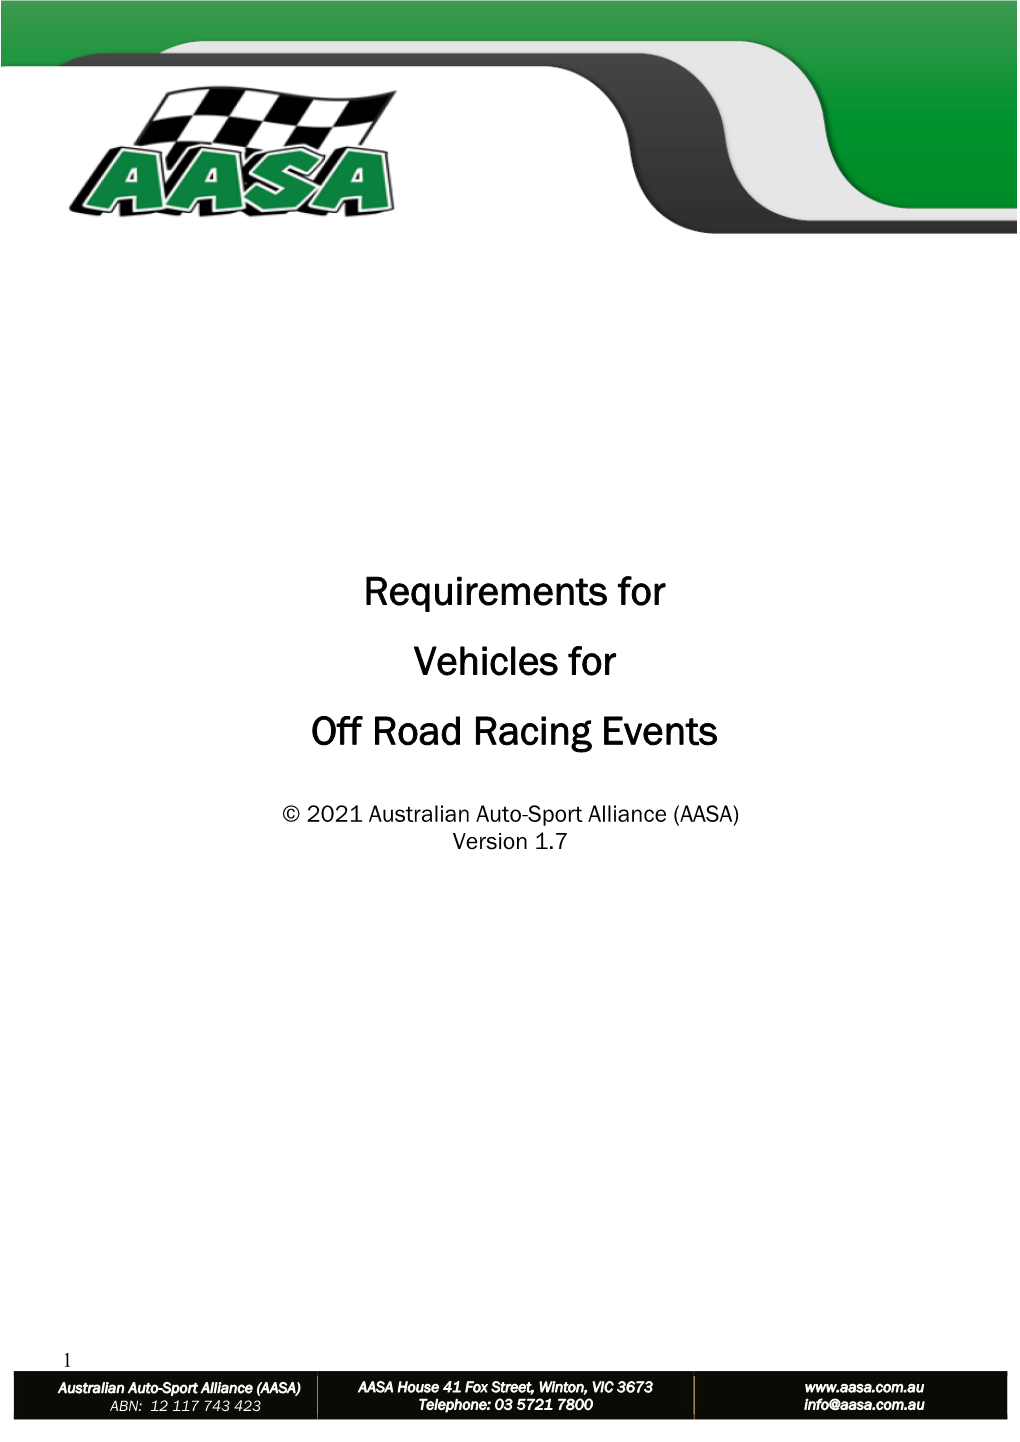 Requirements for Vehicles for Off Road Racing Events